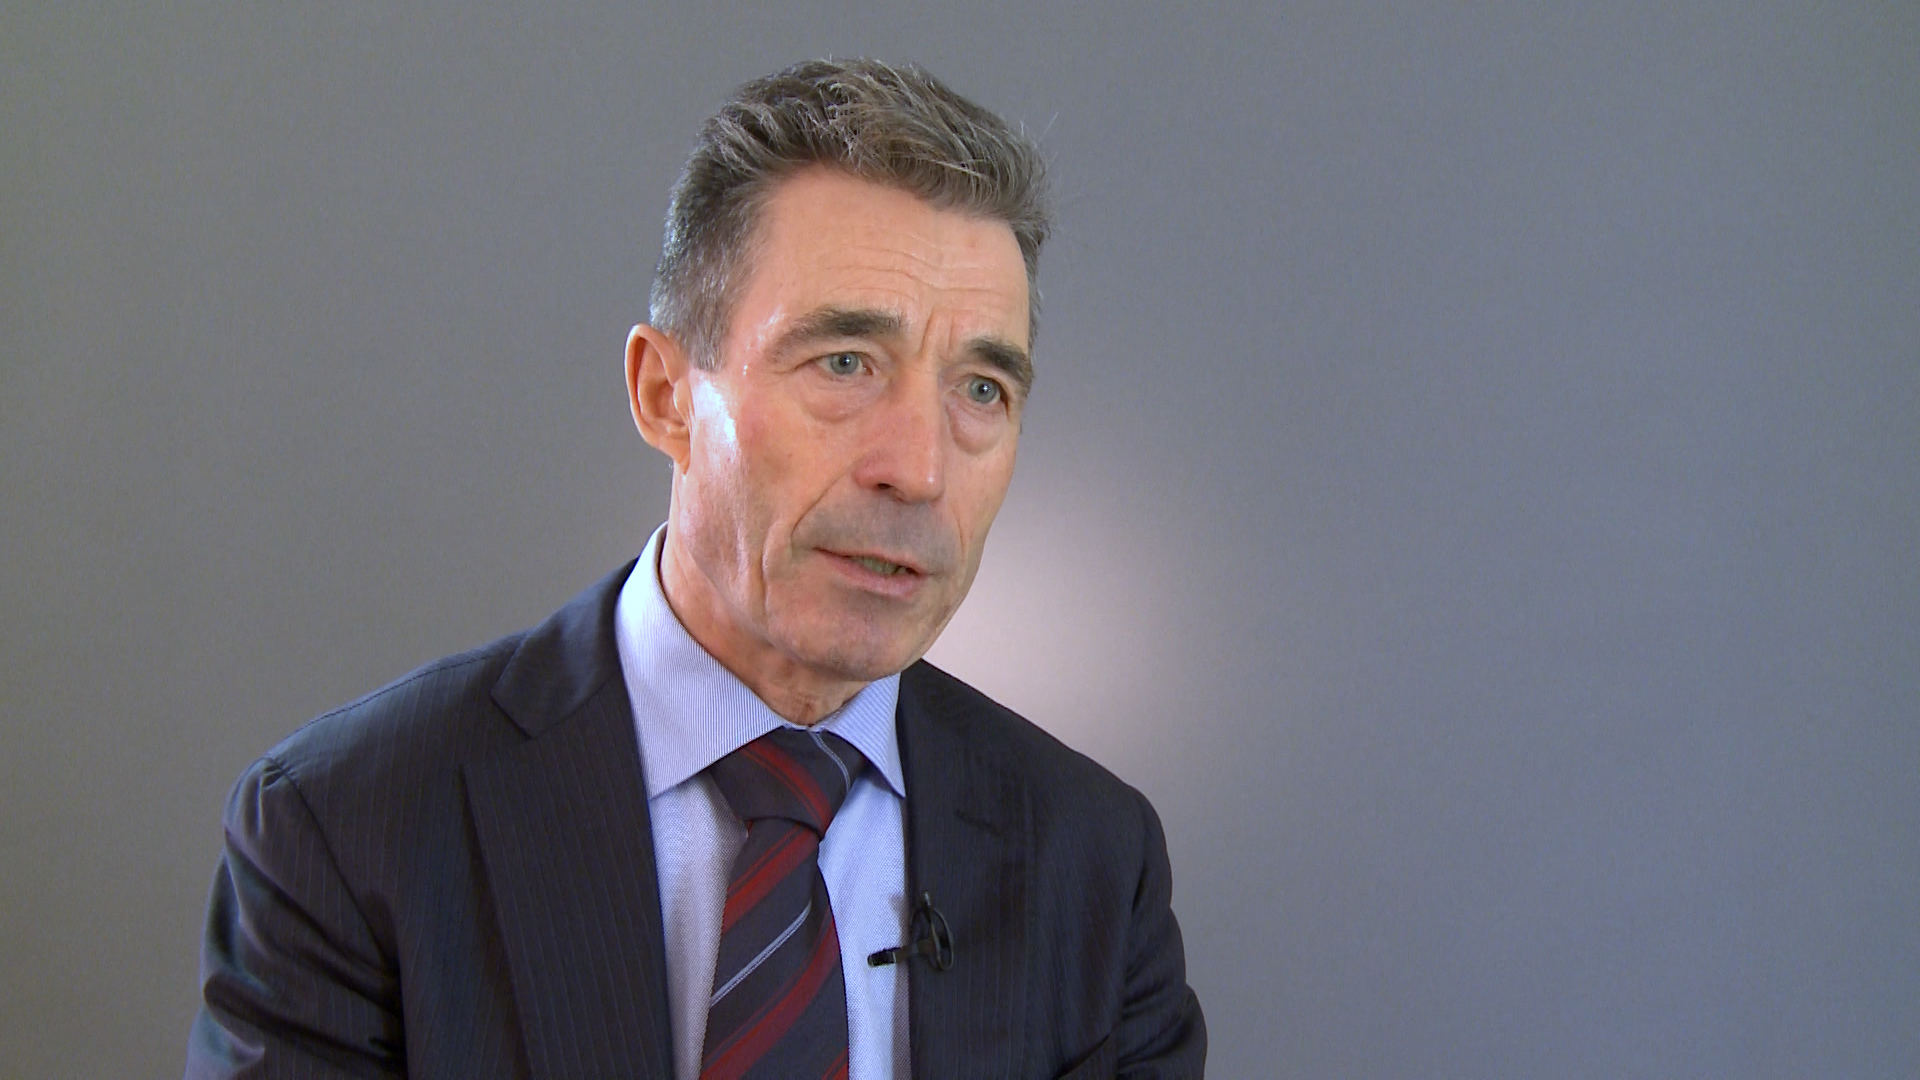 Former secretary general of NATO Anders Fogh Rasmussen was the first Western politician who started talking about Russian supporting of NGOs. PHOTO: Re:Baltica/Mistrus Media